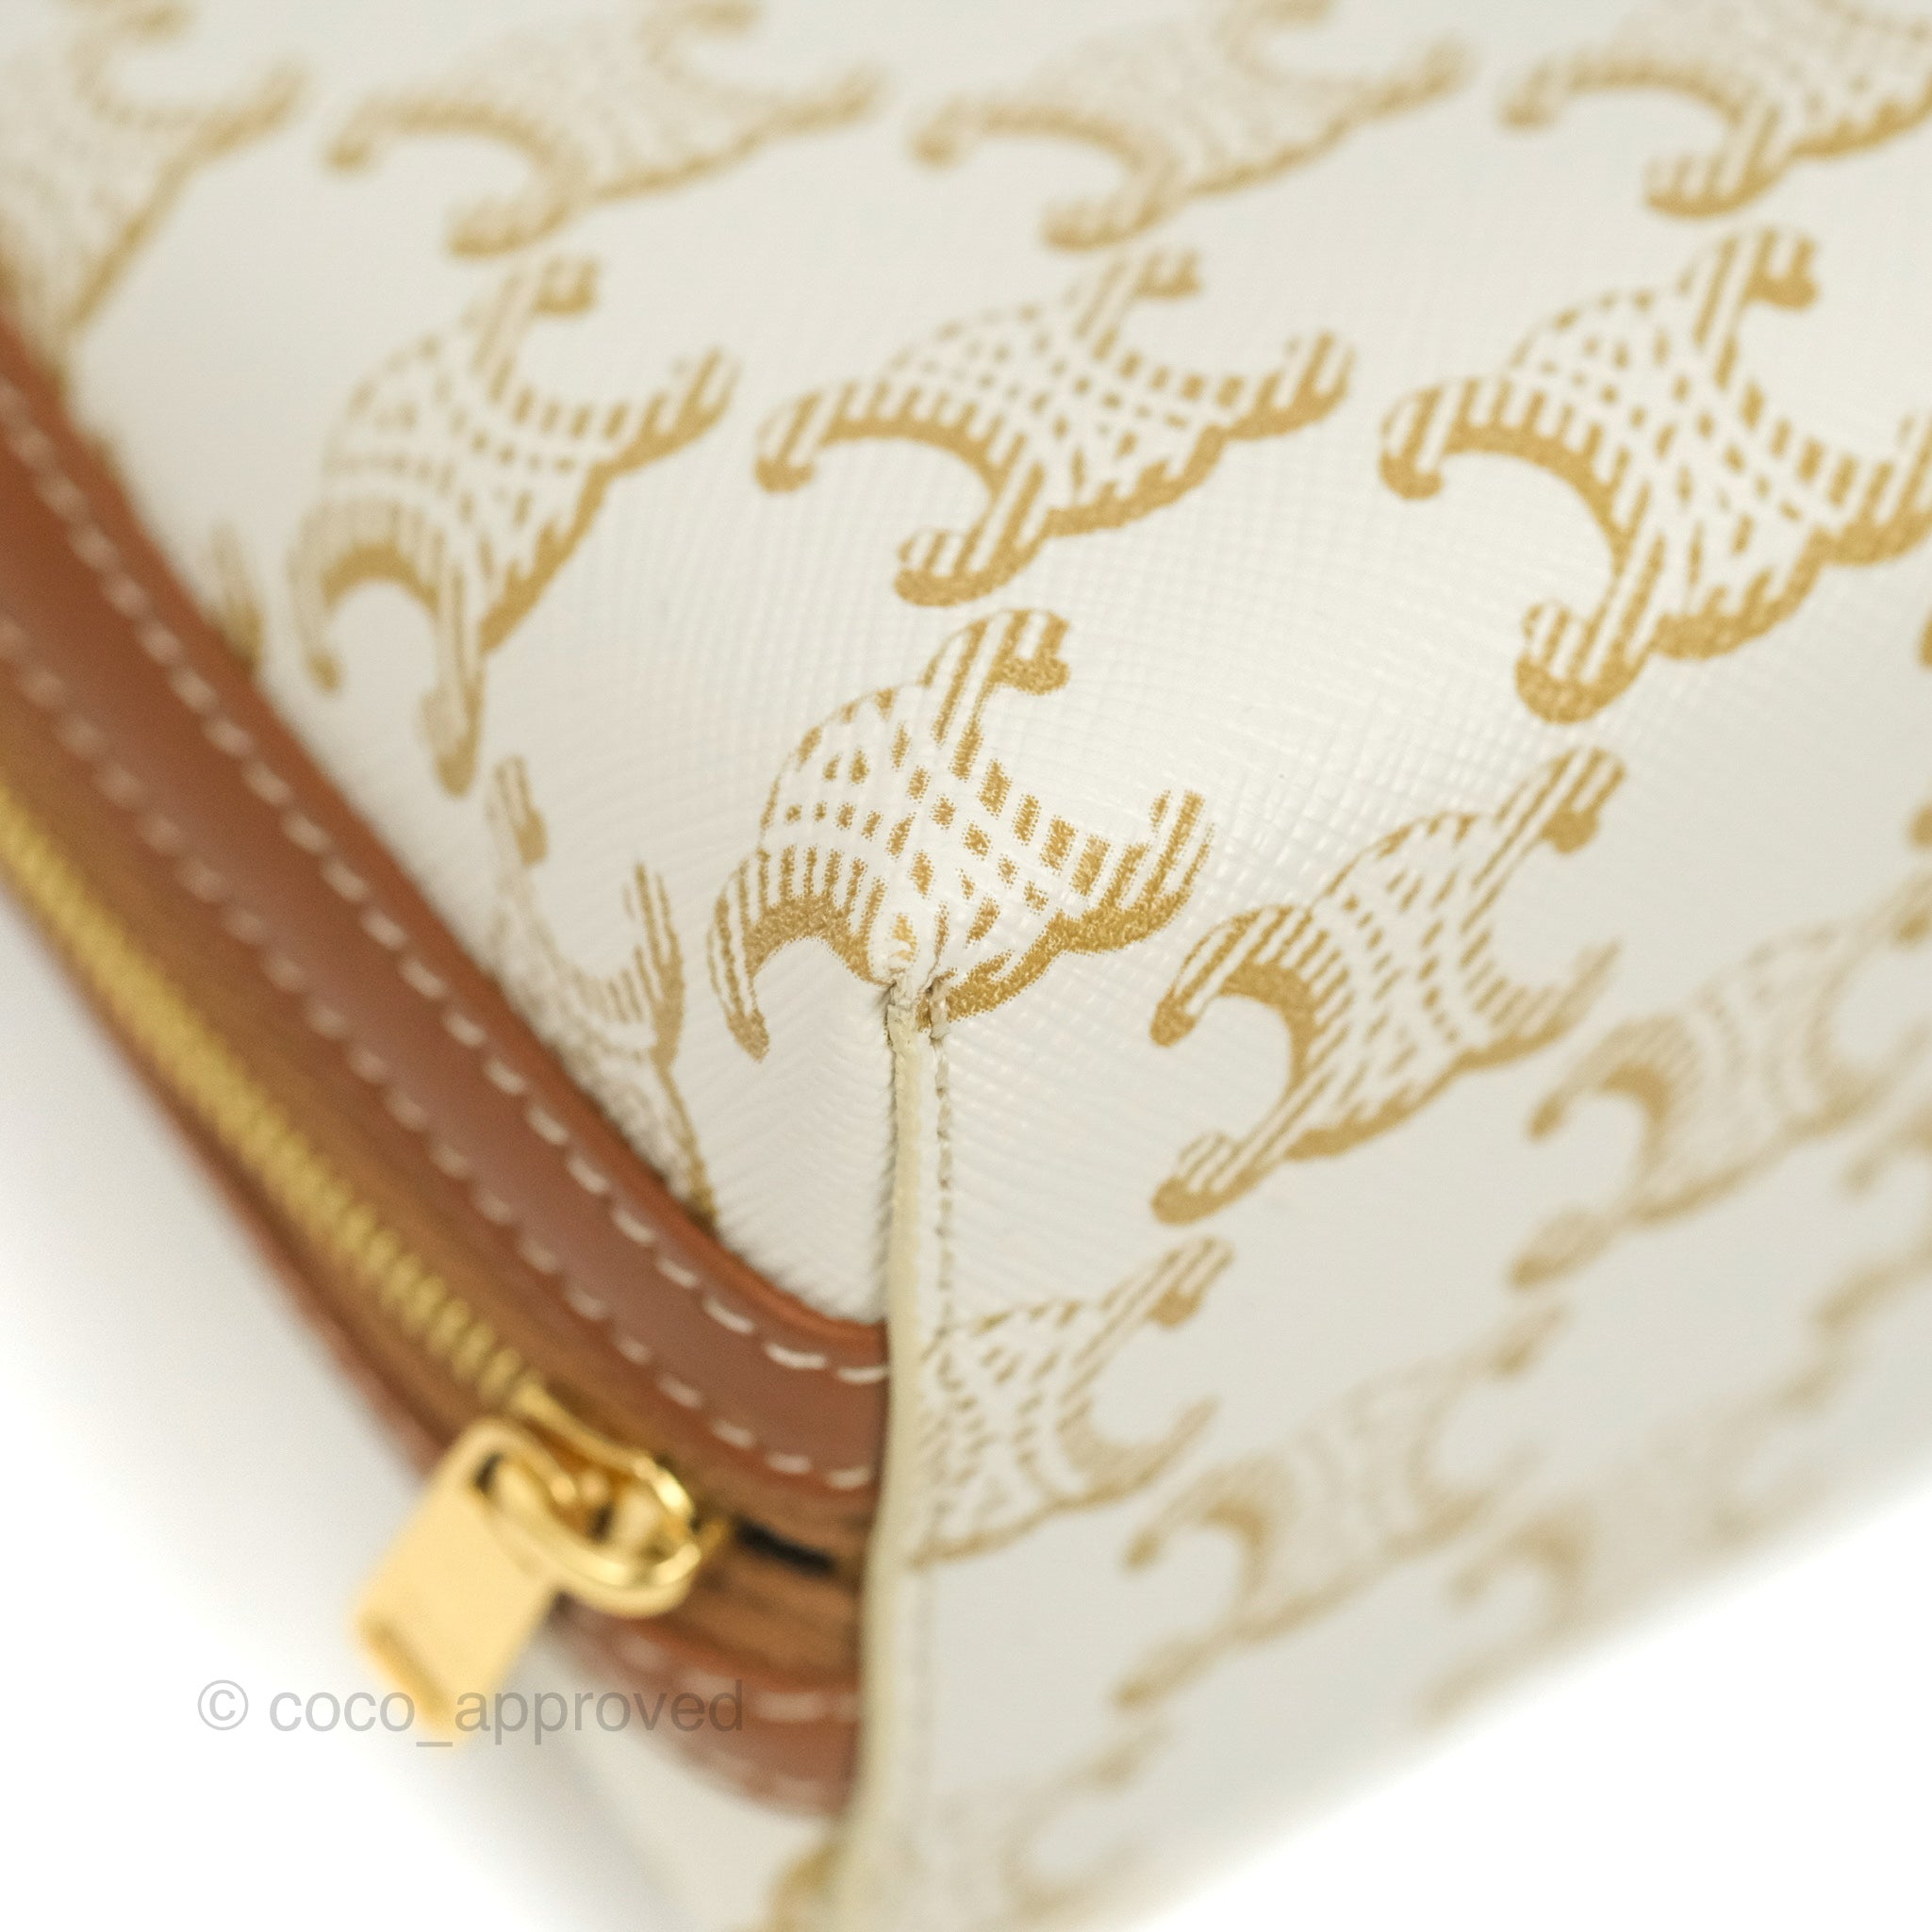 Celine Clutch With Chain Triomphe Canvas Lambskin White/Tan